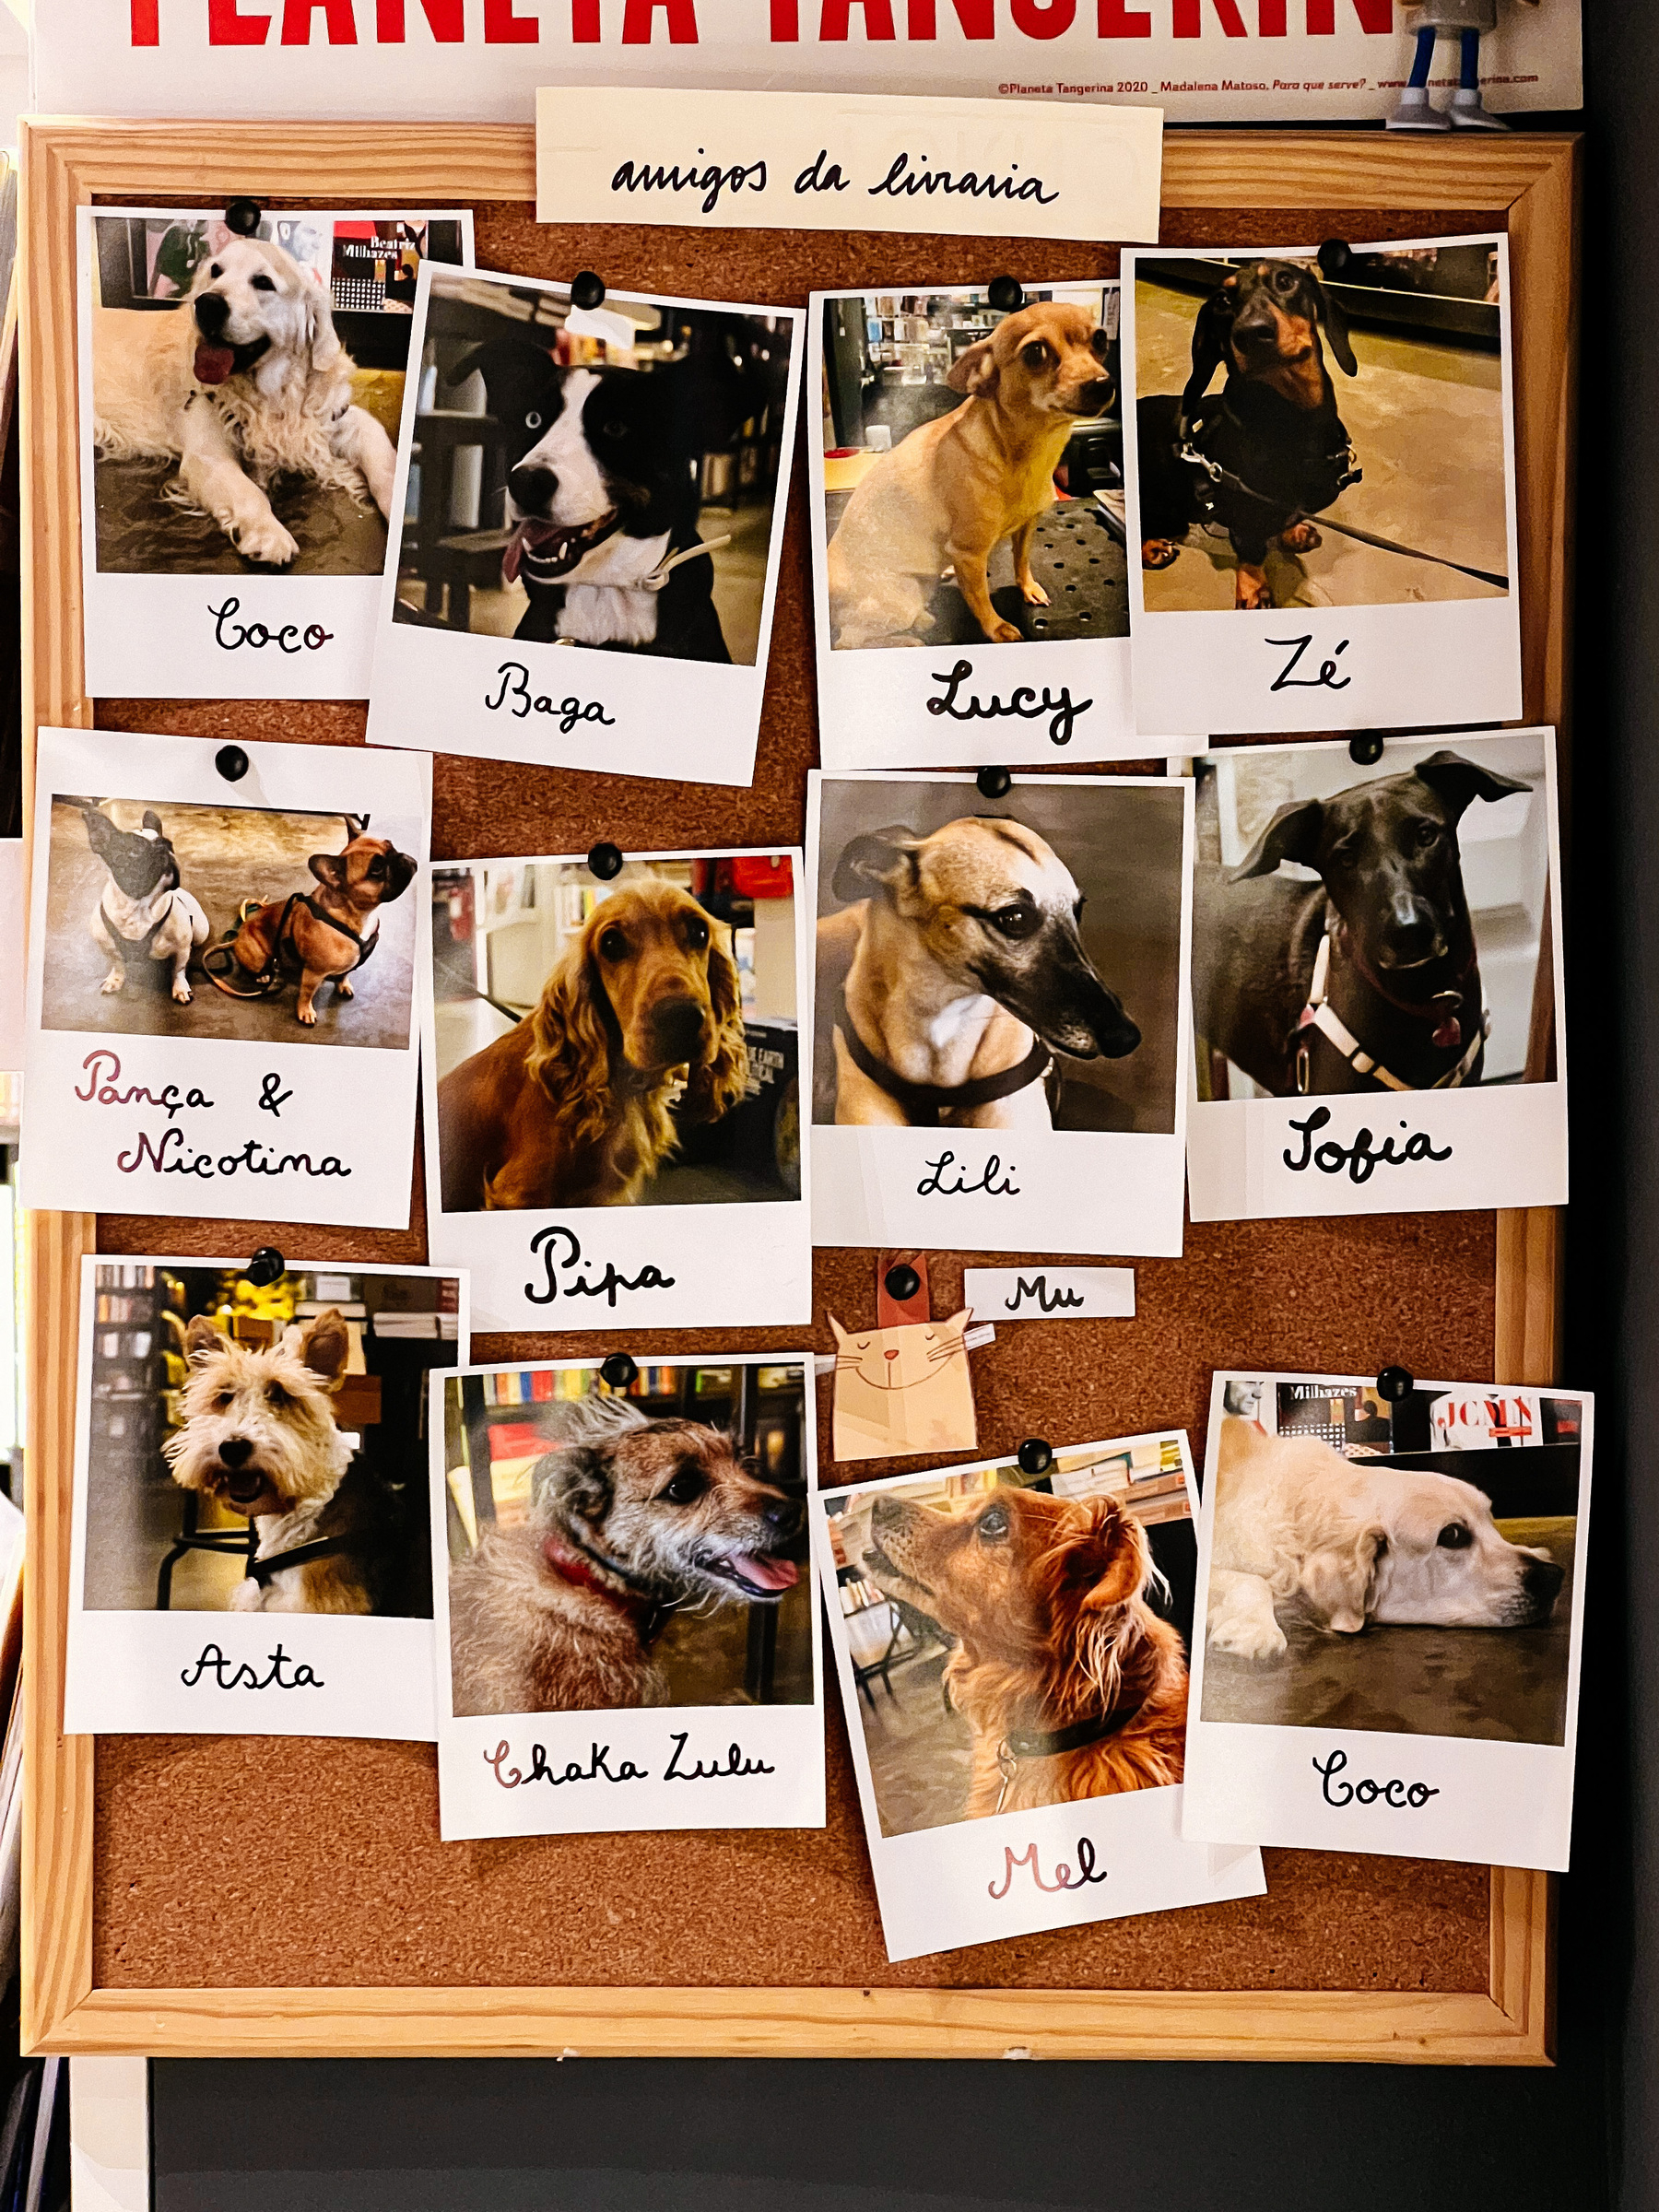 Photos of dogs on a cork board.